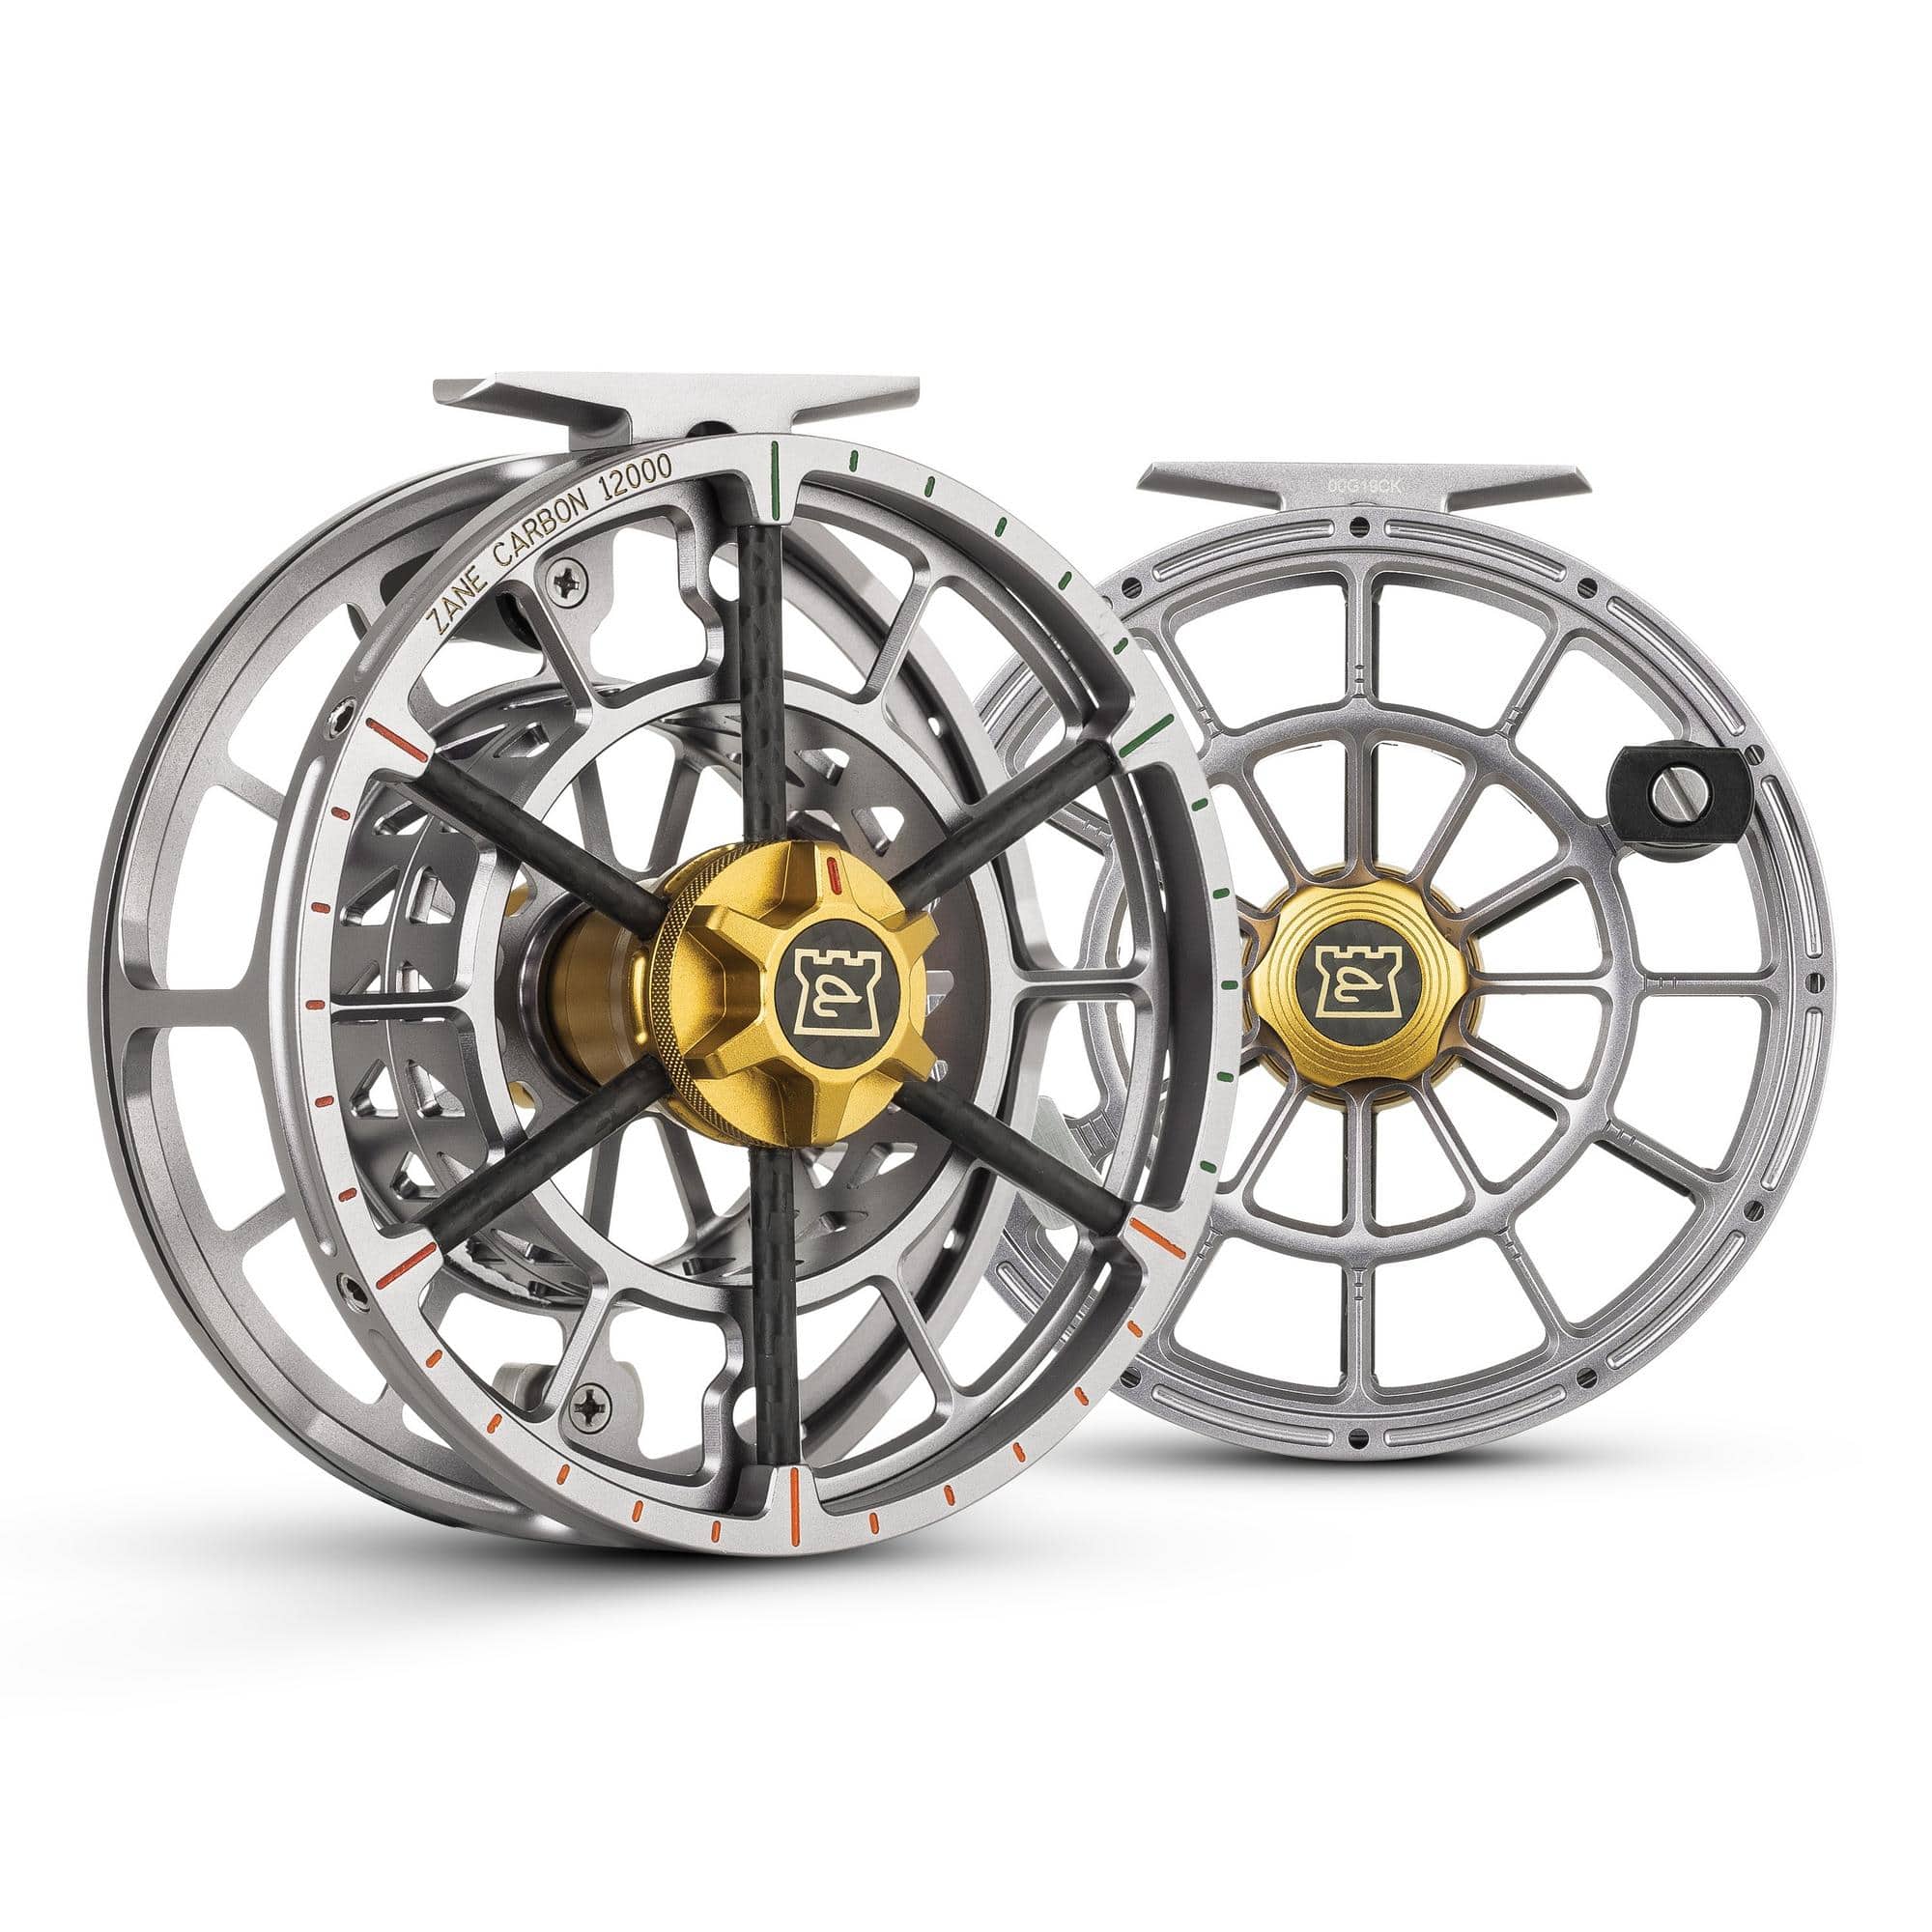 Hardy Zane Carbon Fly Reel - The Saltwater Edge